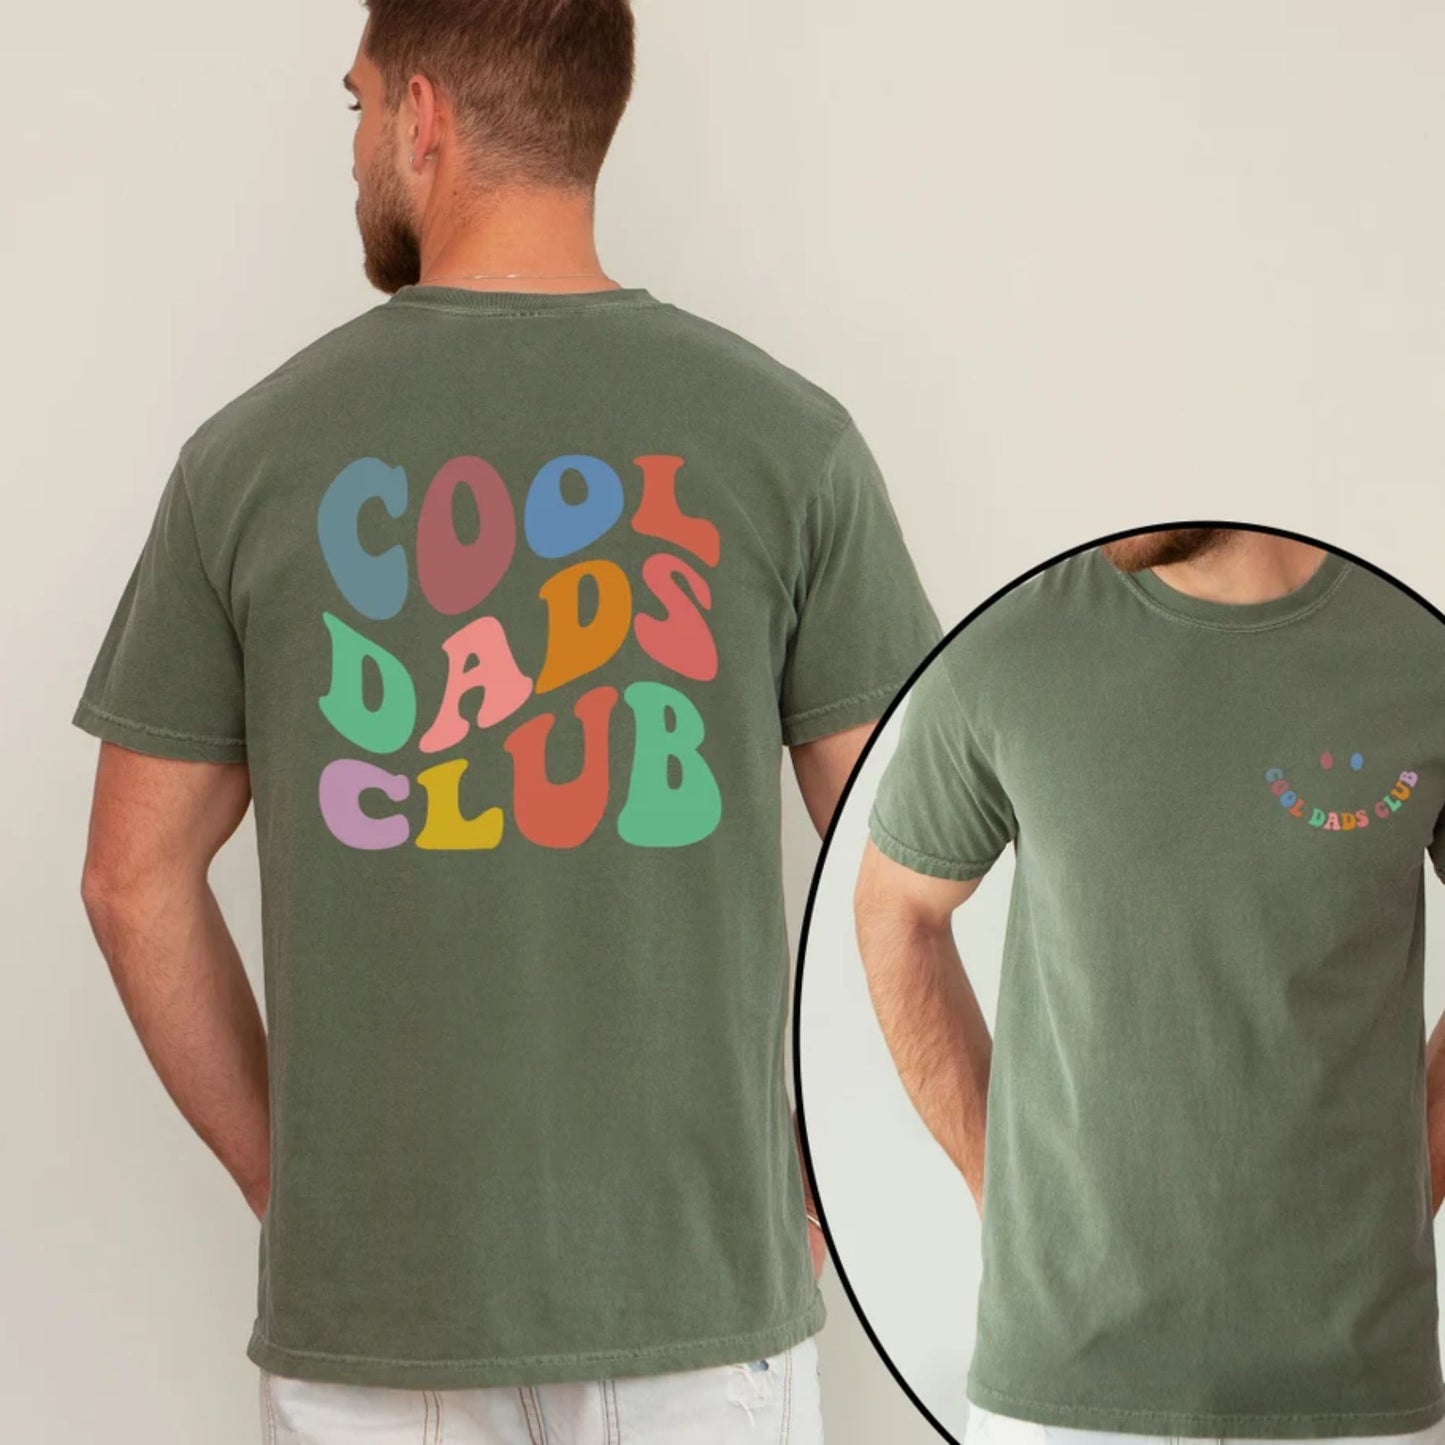 Cool Dads Club Shirt - Gift for Papa